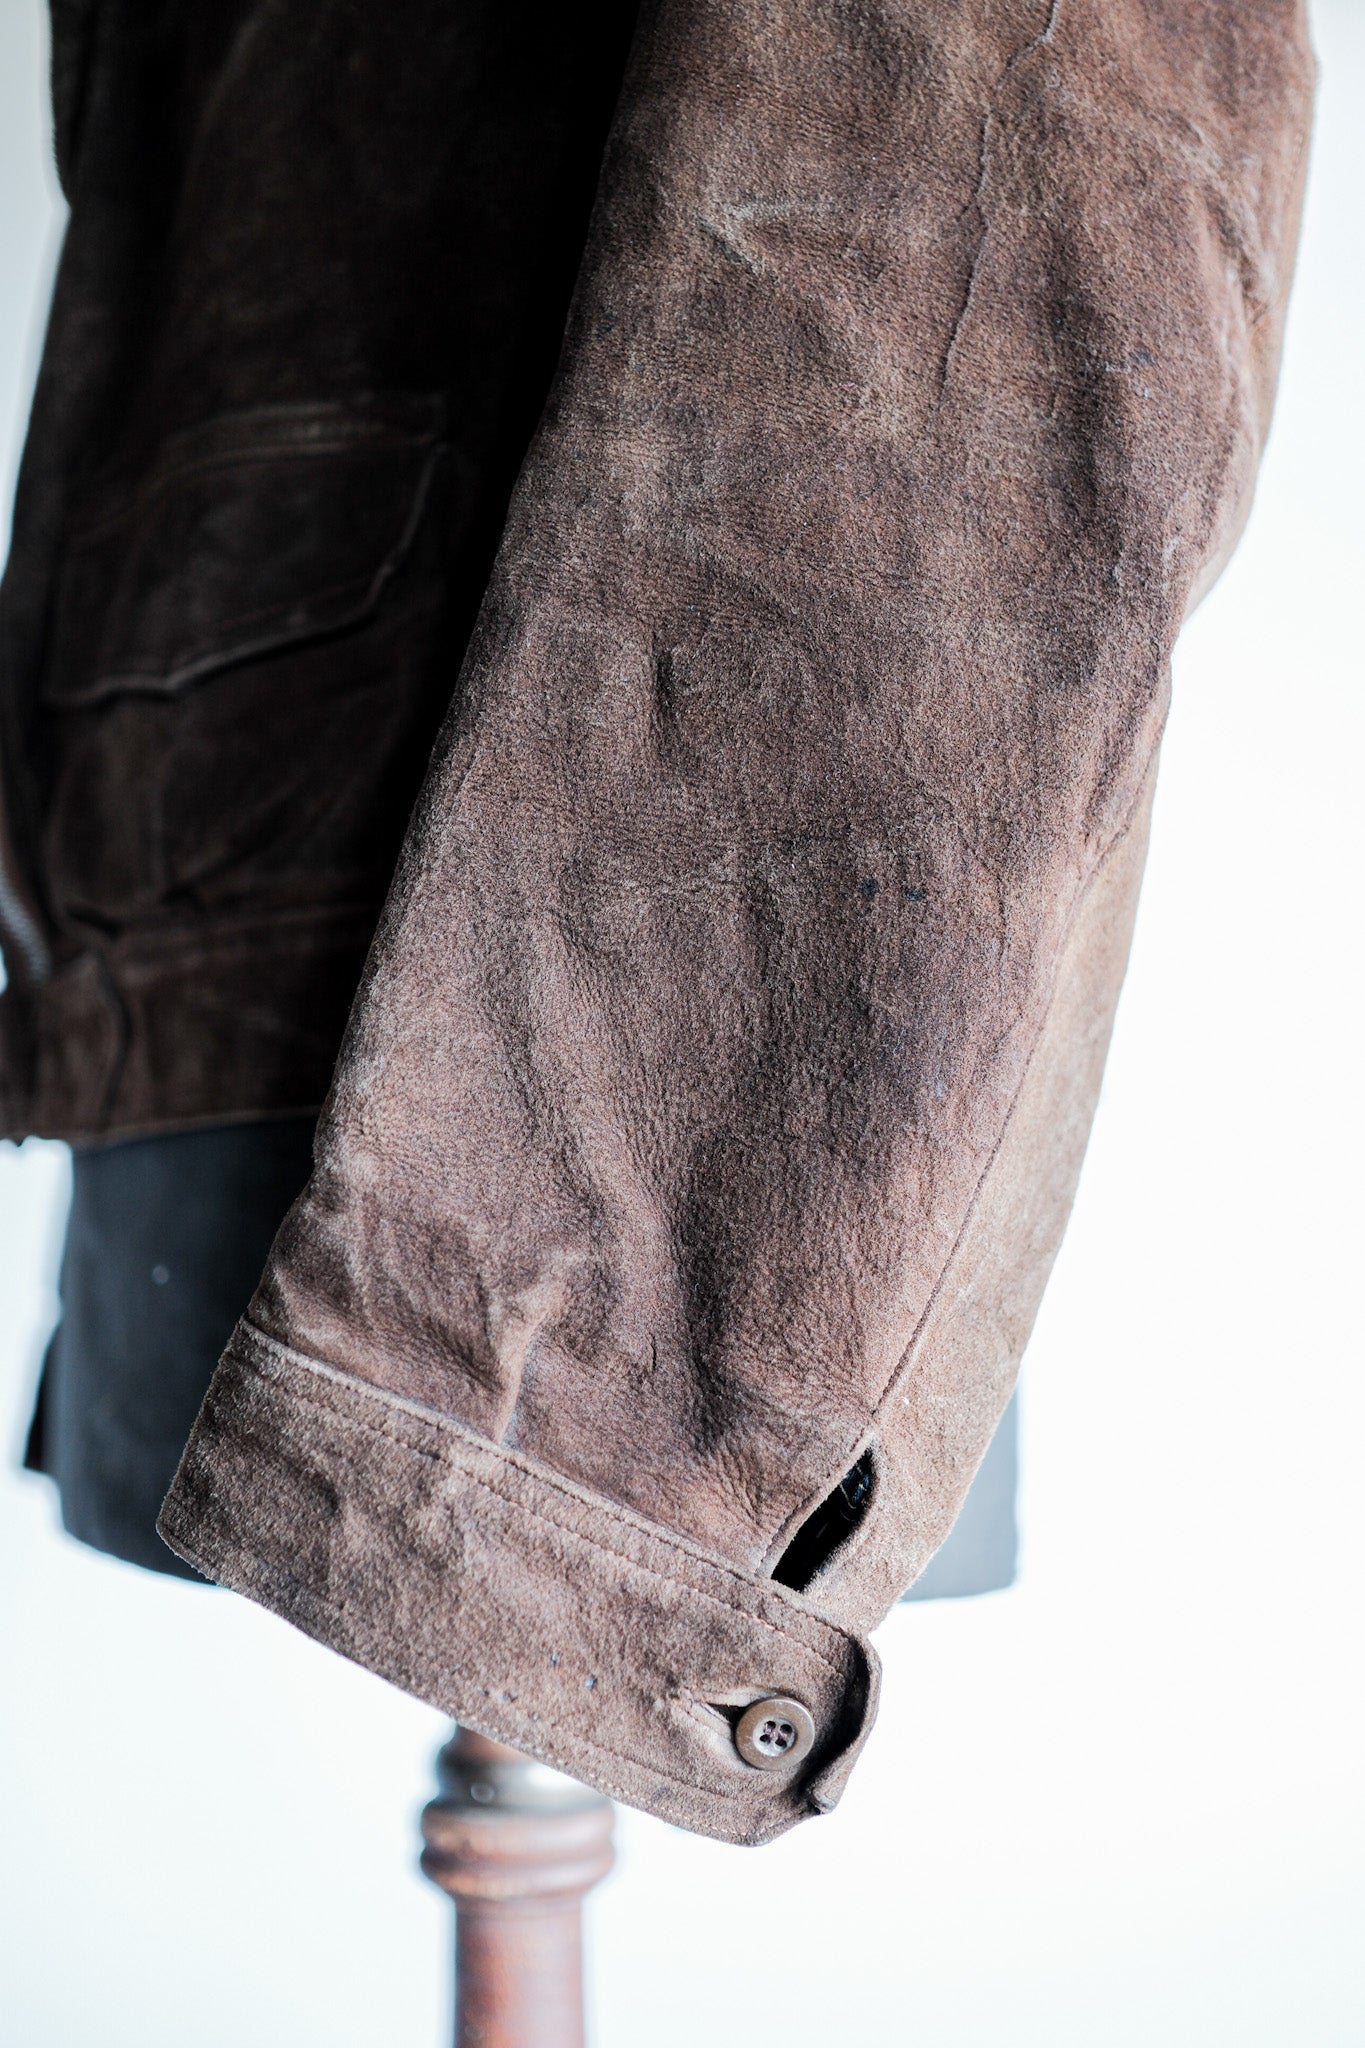 【~30’s】French Vintage Suede Leather Cyclist Jacket